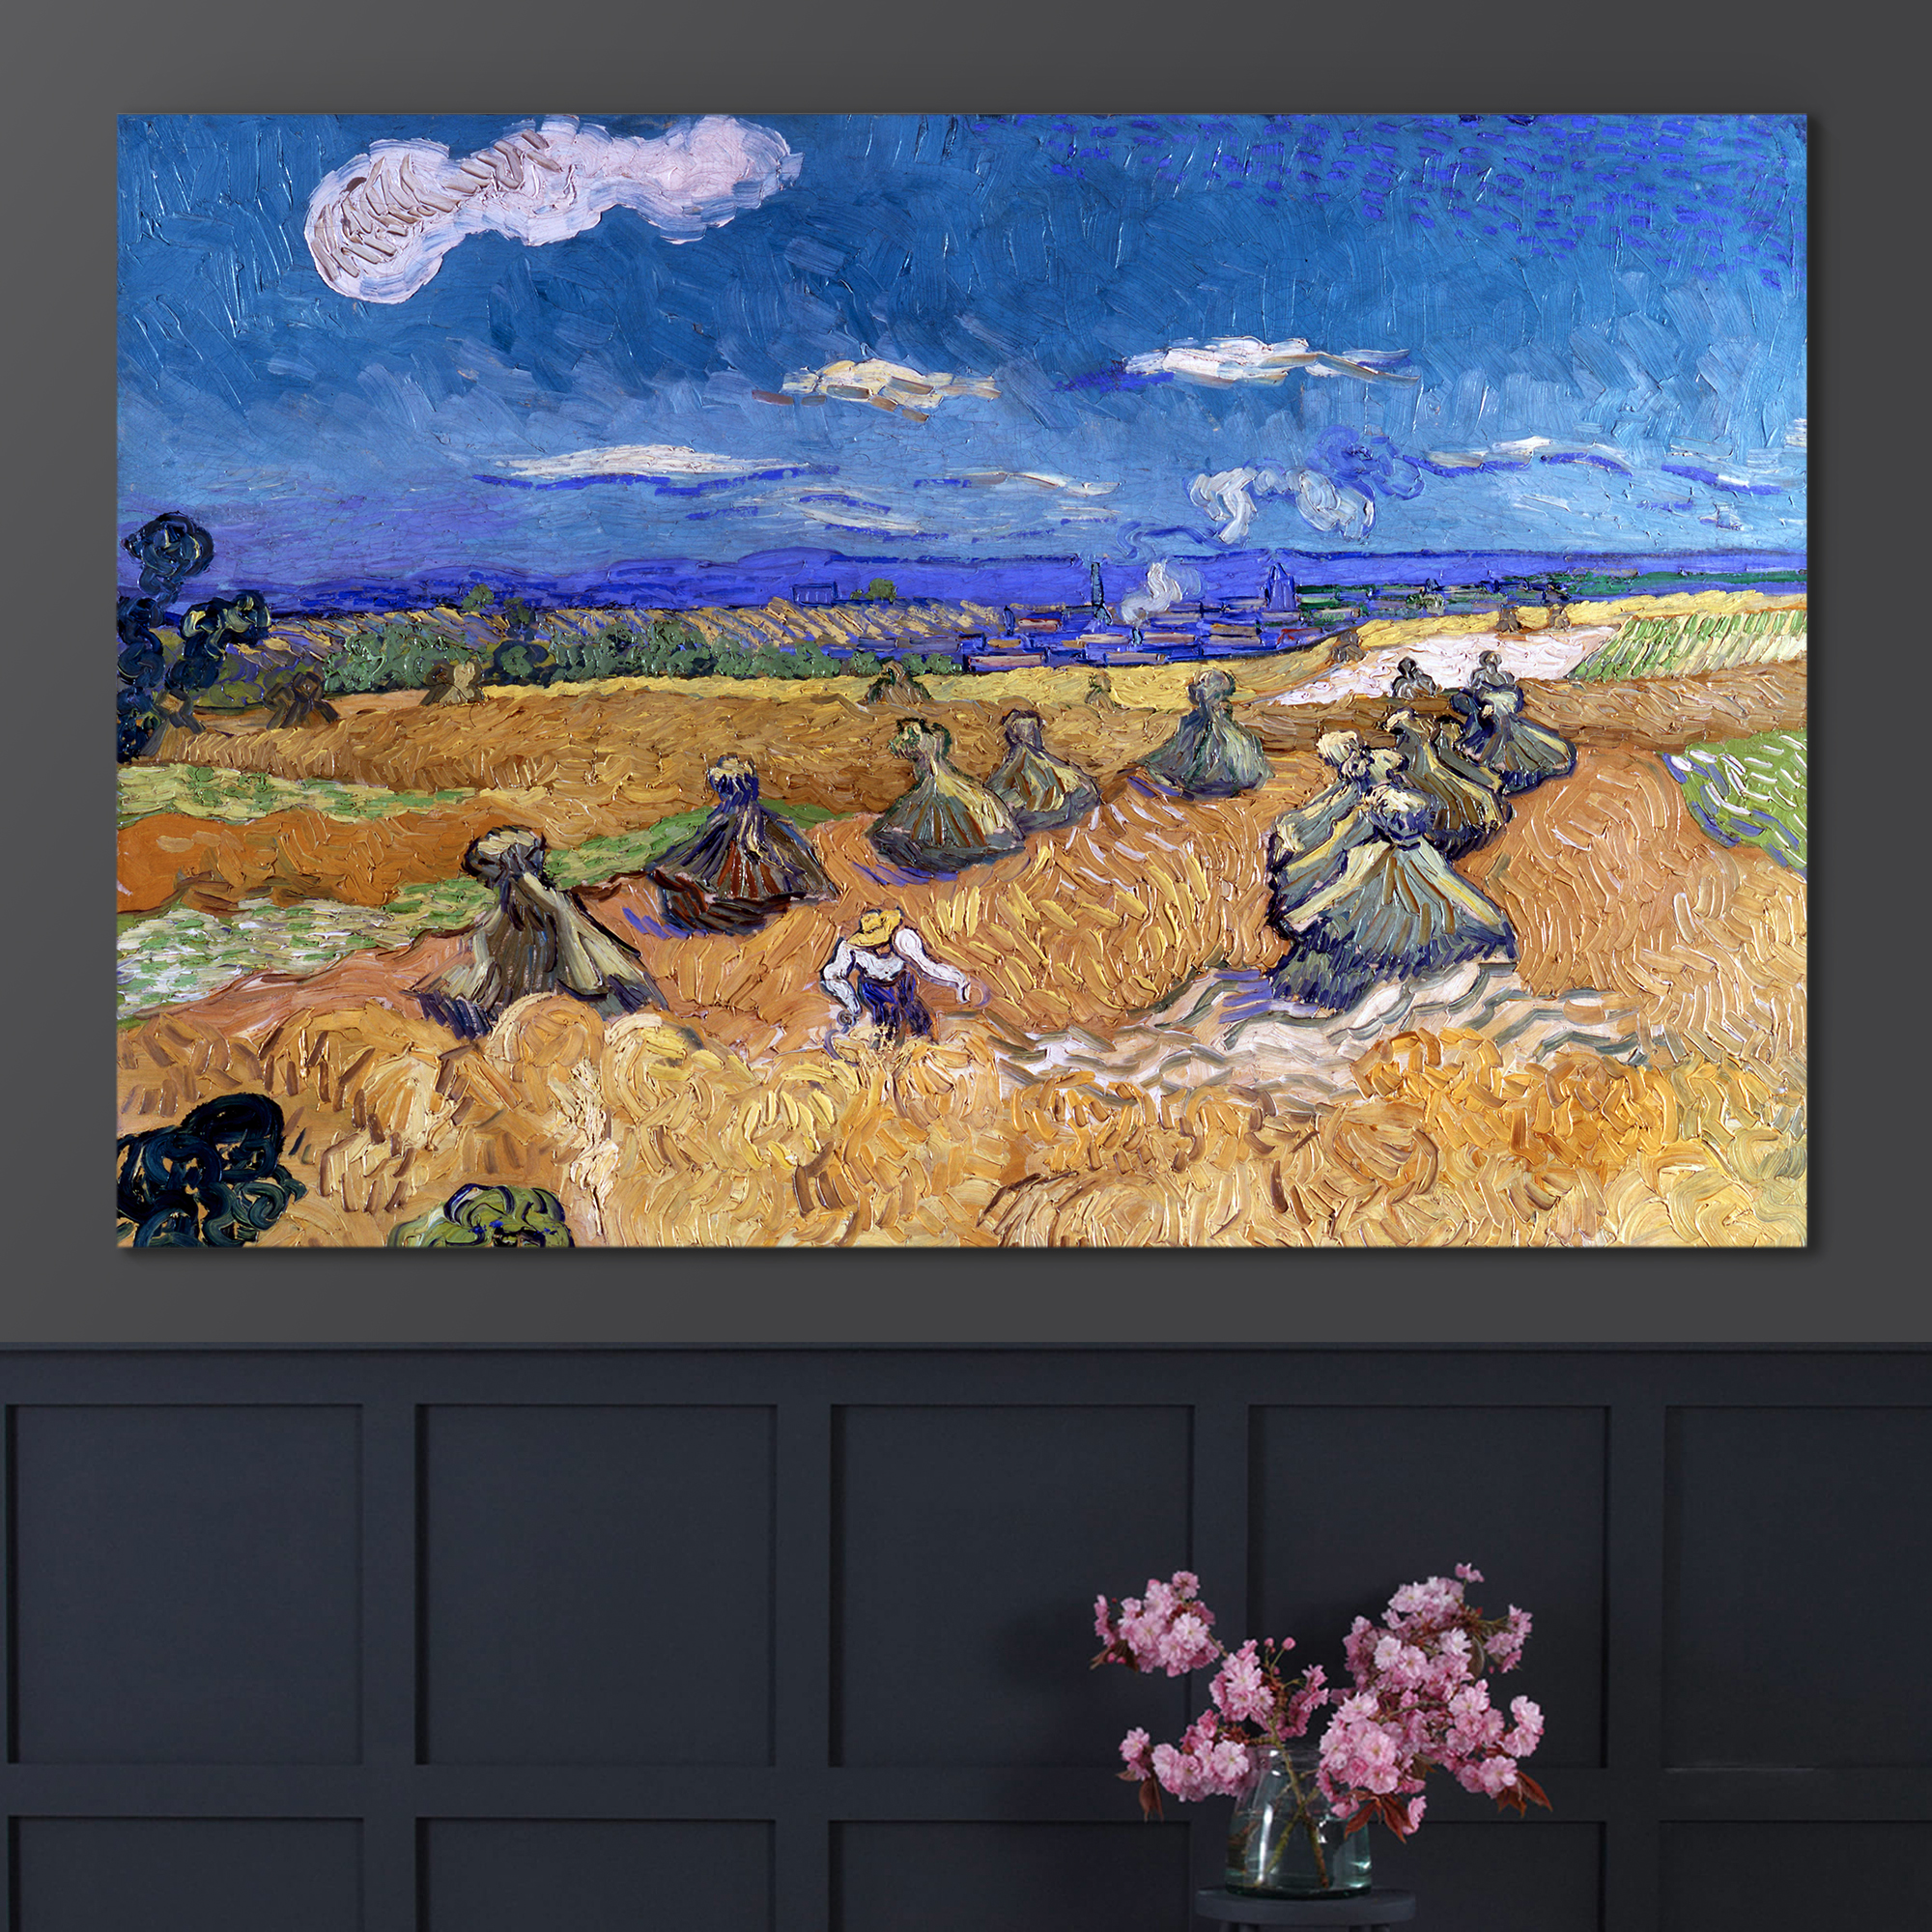 Wheat Fields with Reaper, Auvers by Vincent Van Gogh - Oil Painting Reproduction on Canvas Prints Wall Art, Ready to Hang - 32